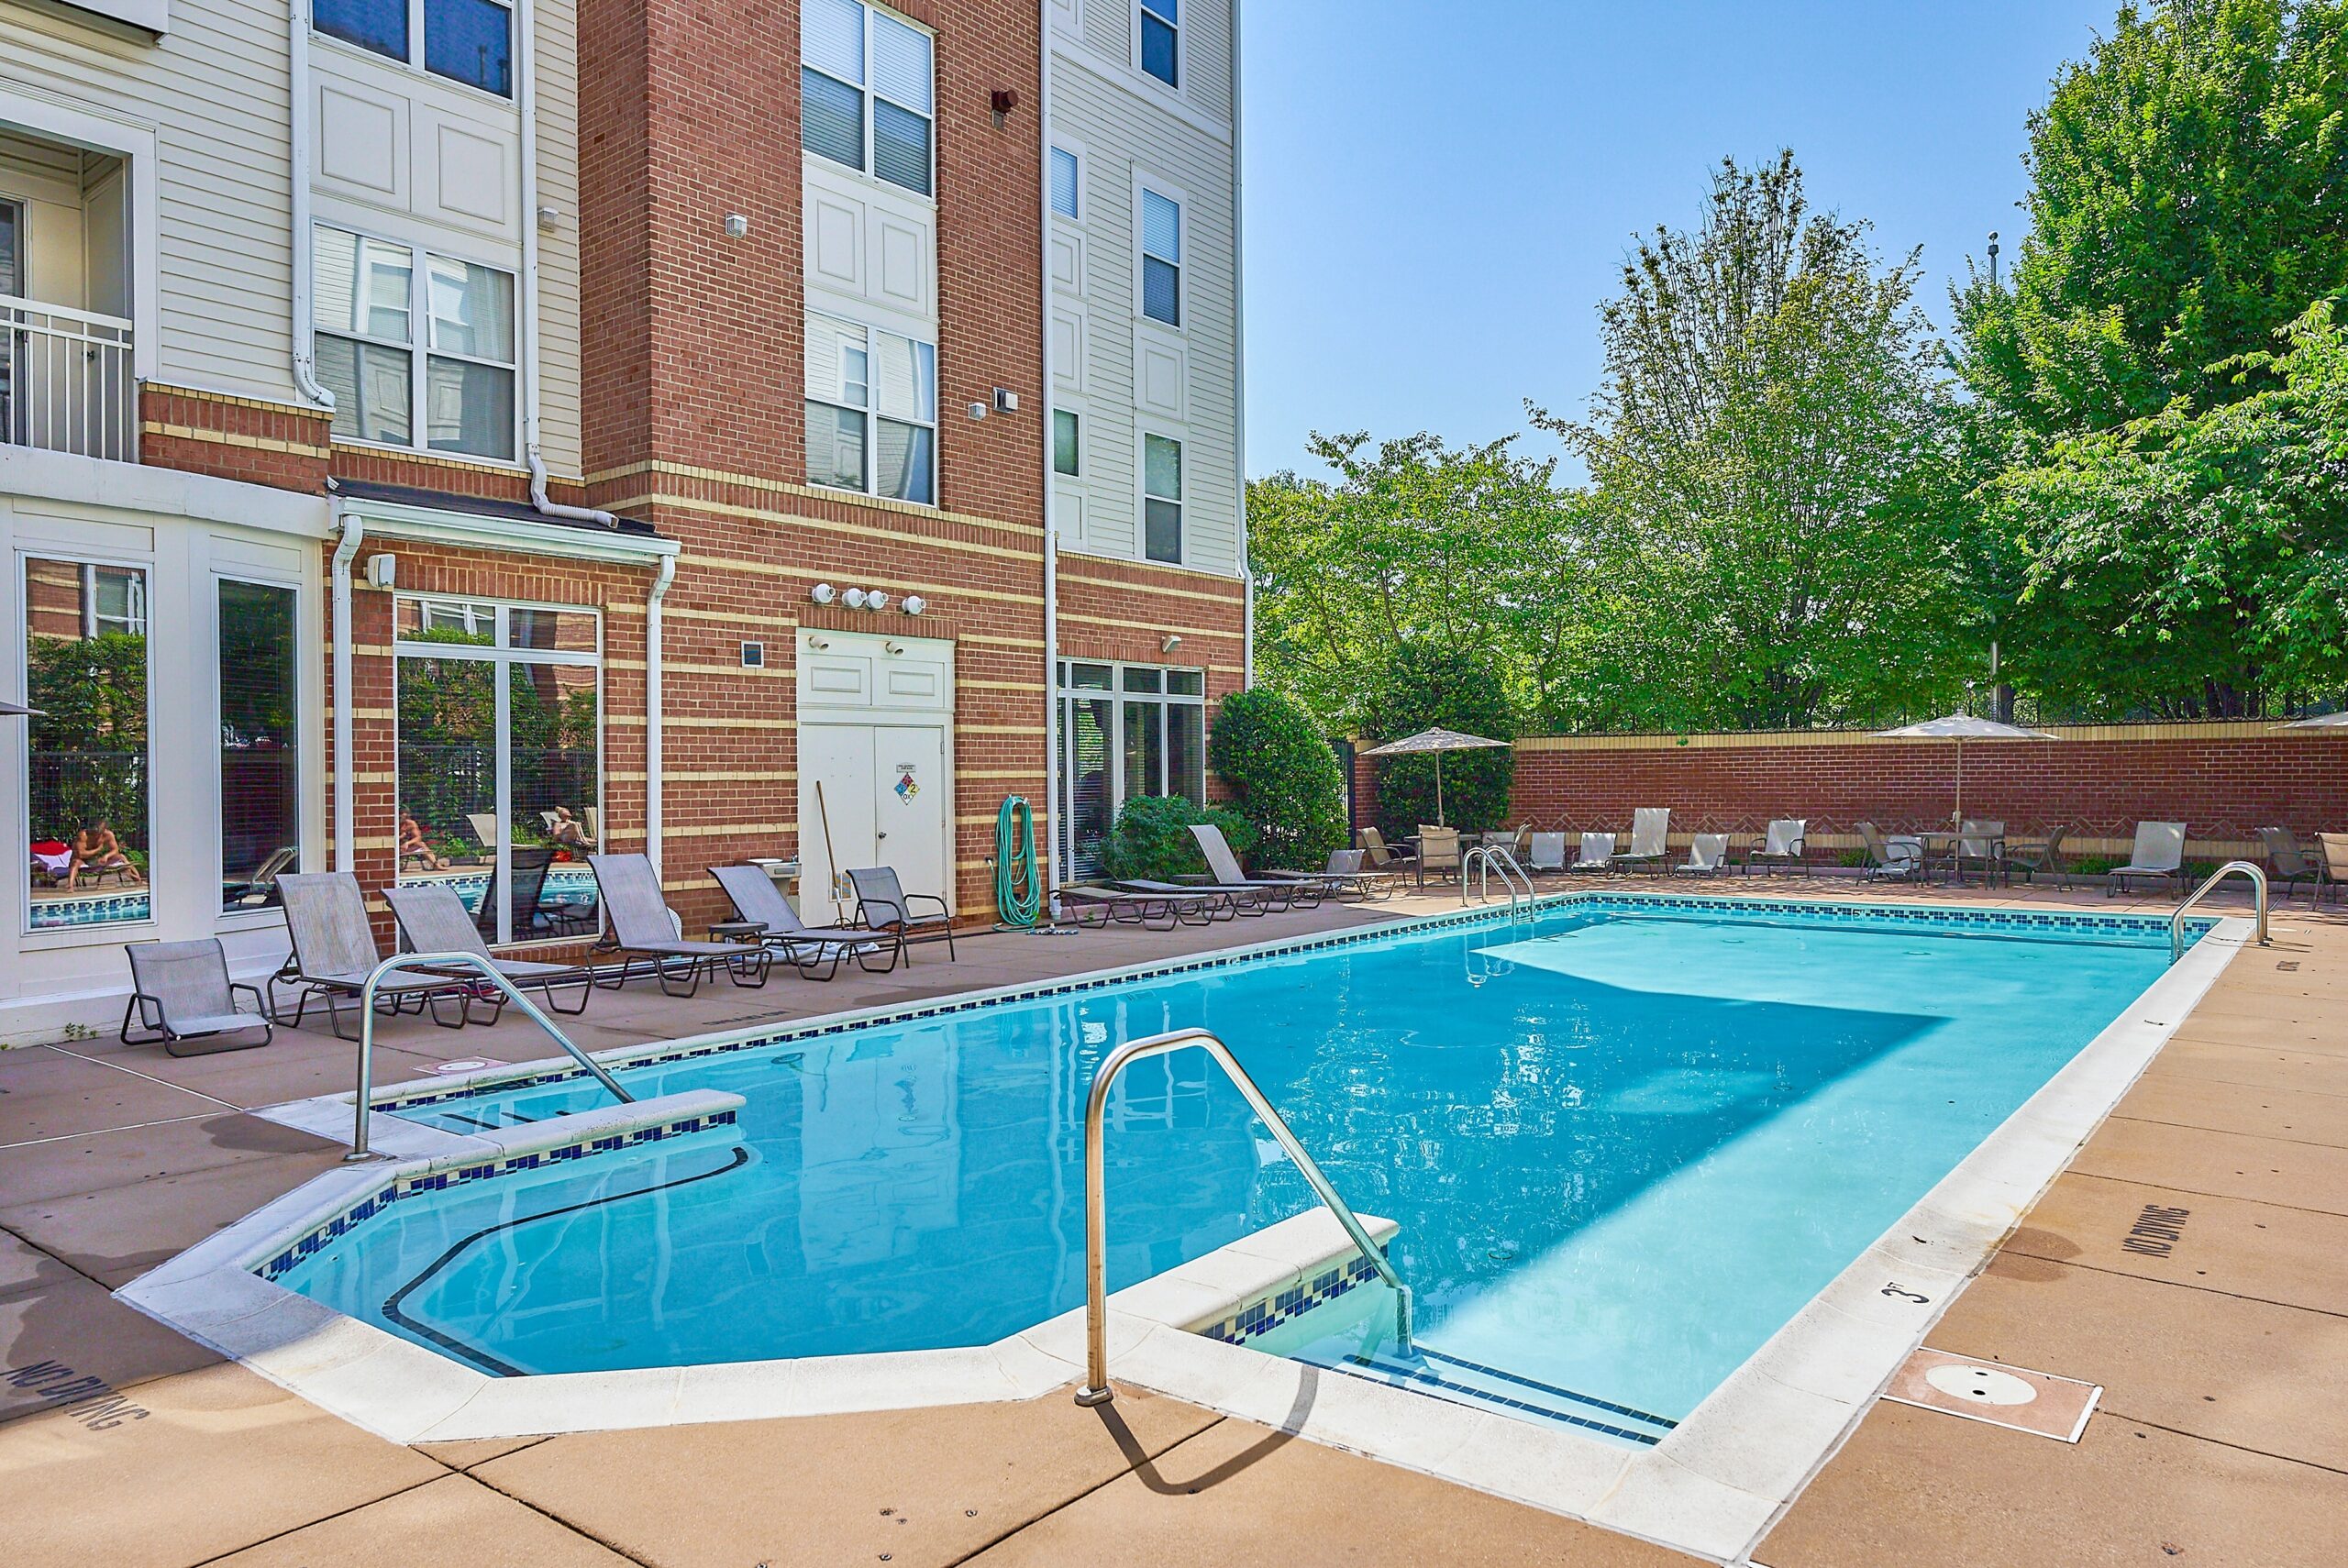 Large outdoor condo pool with sun and lounge chairs around it on a sunny day